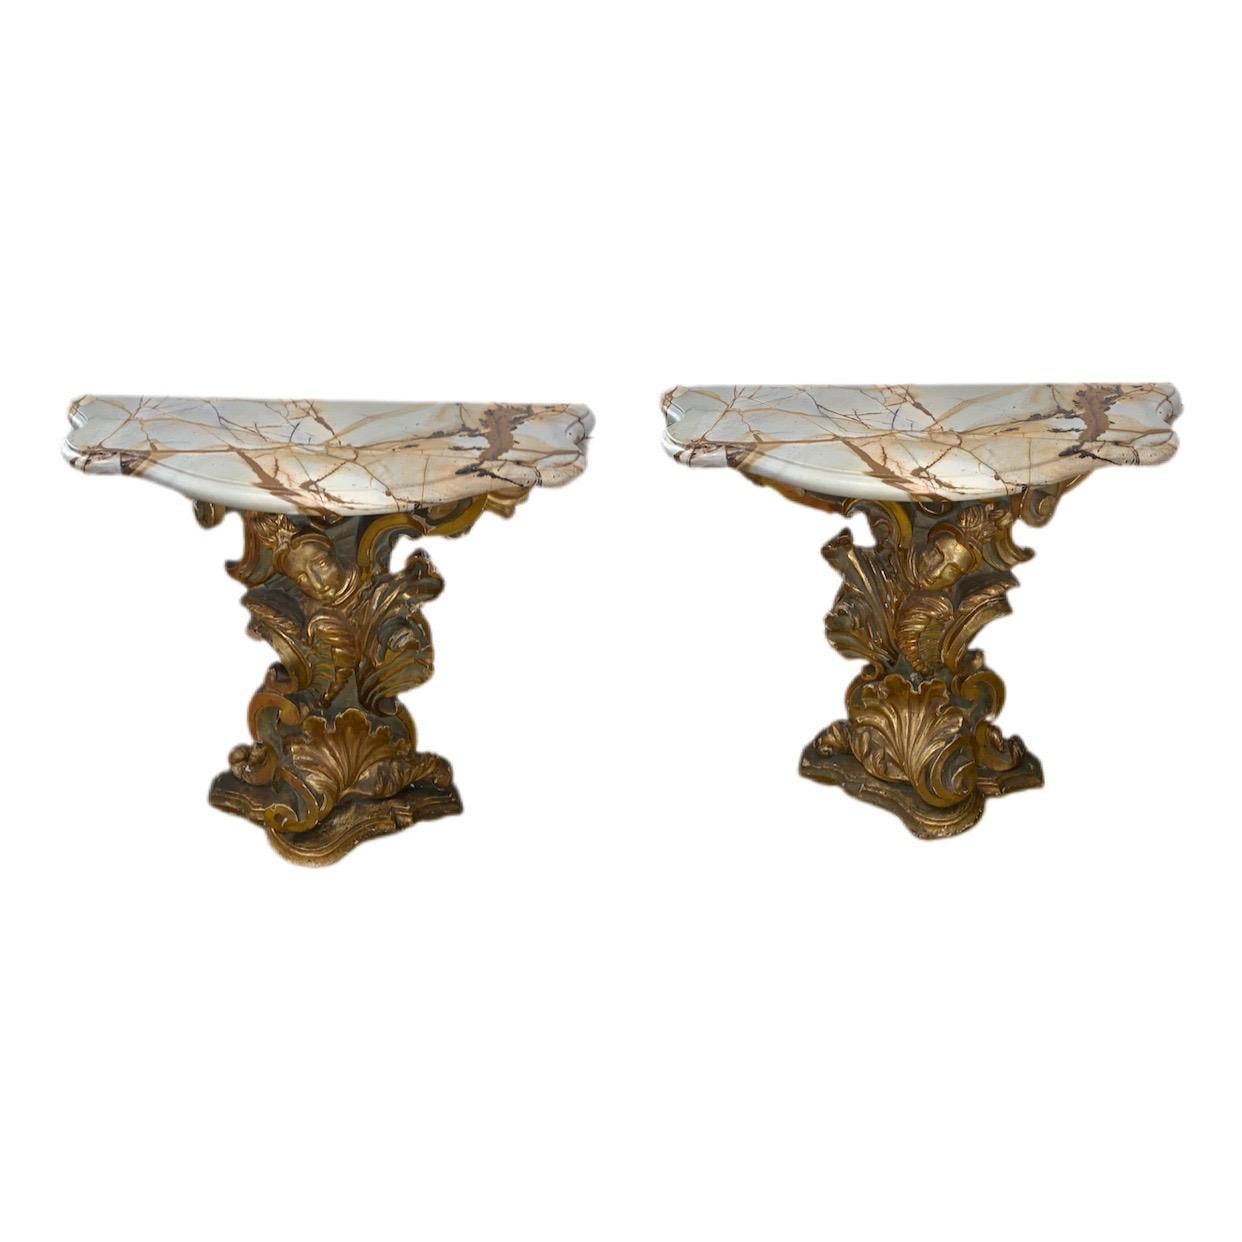 Hand-Carved Pair of 18th Century Italian Painted & Gilt Carved Wood Consoles